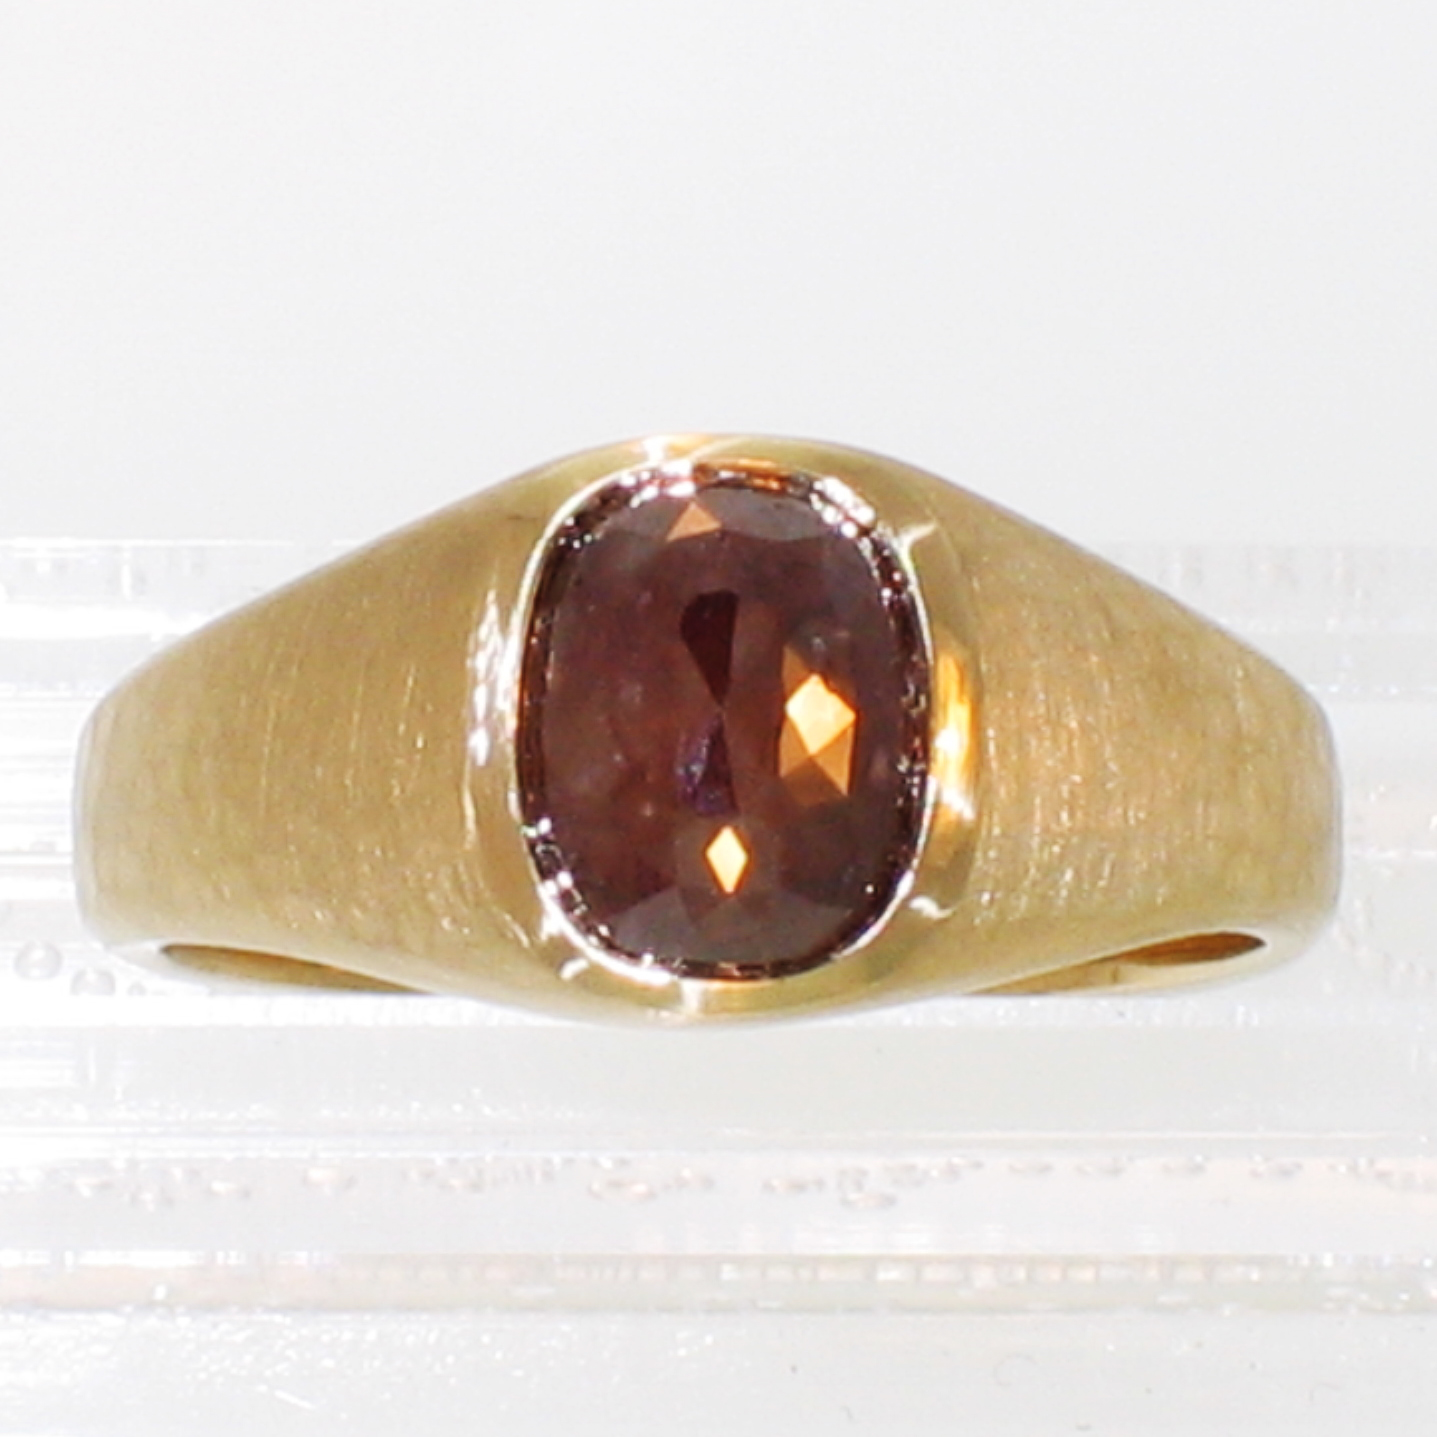 14 Karat Yellow gold hammered ring with lens-cut Matrix Diamond in polished bezel